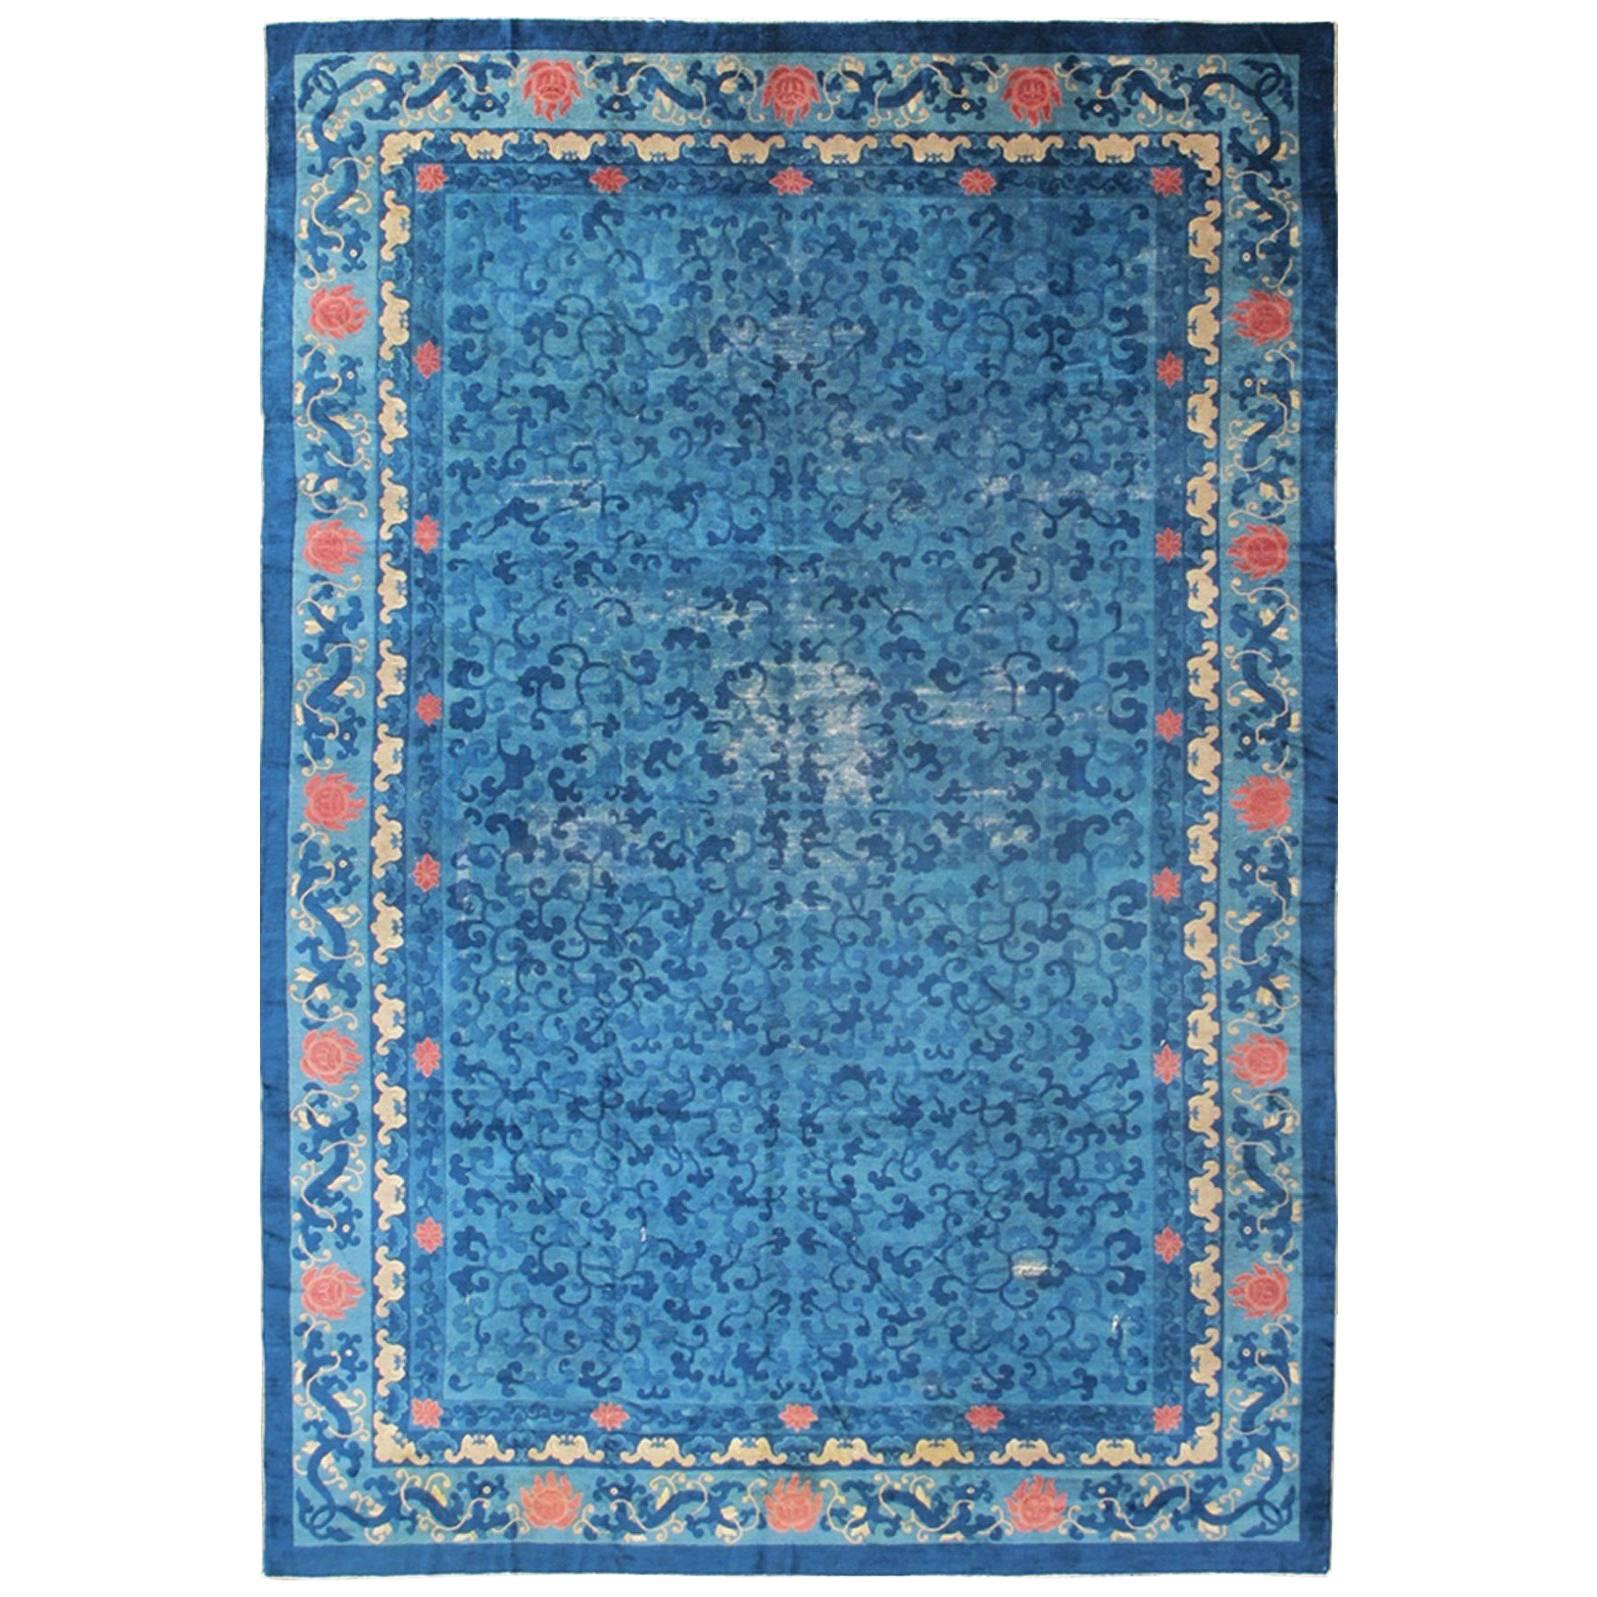 Blue 19th Century Antique Chinese Peking Rug with All-Over Floral Pattern